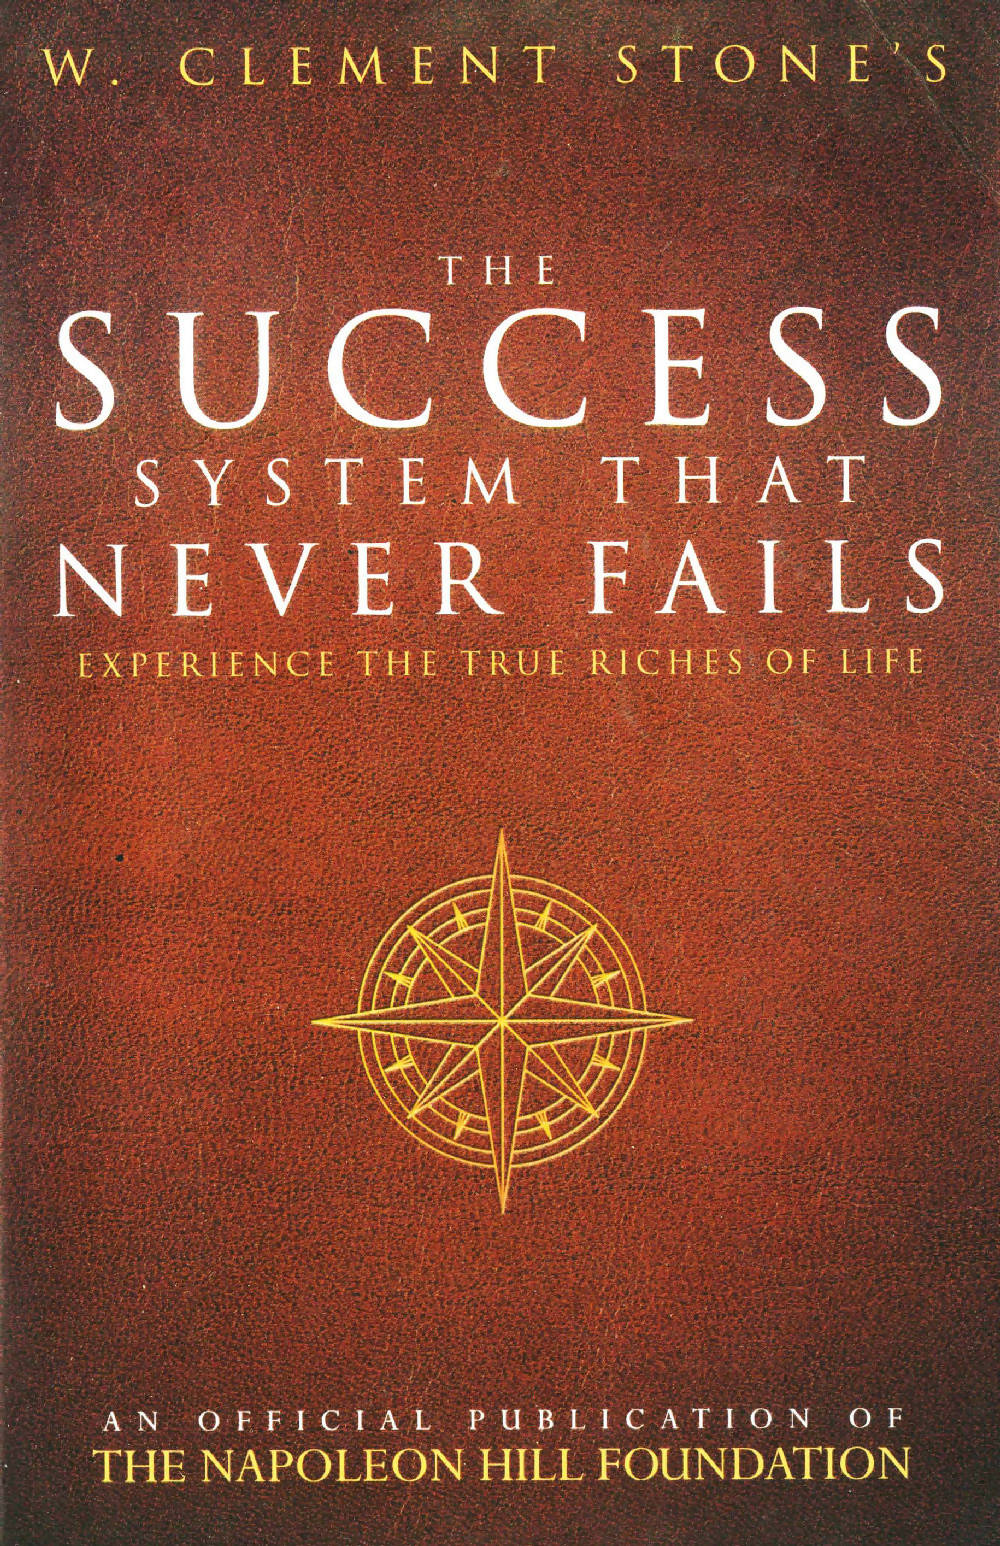 The Success System That Never Fails - Experience the True Riches of Life